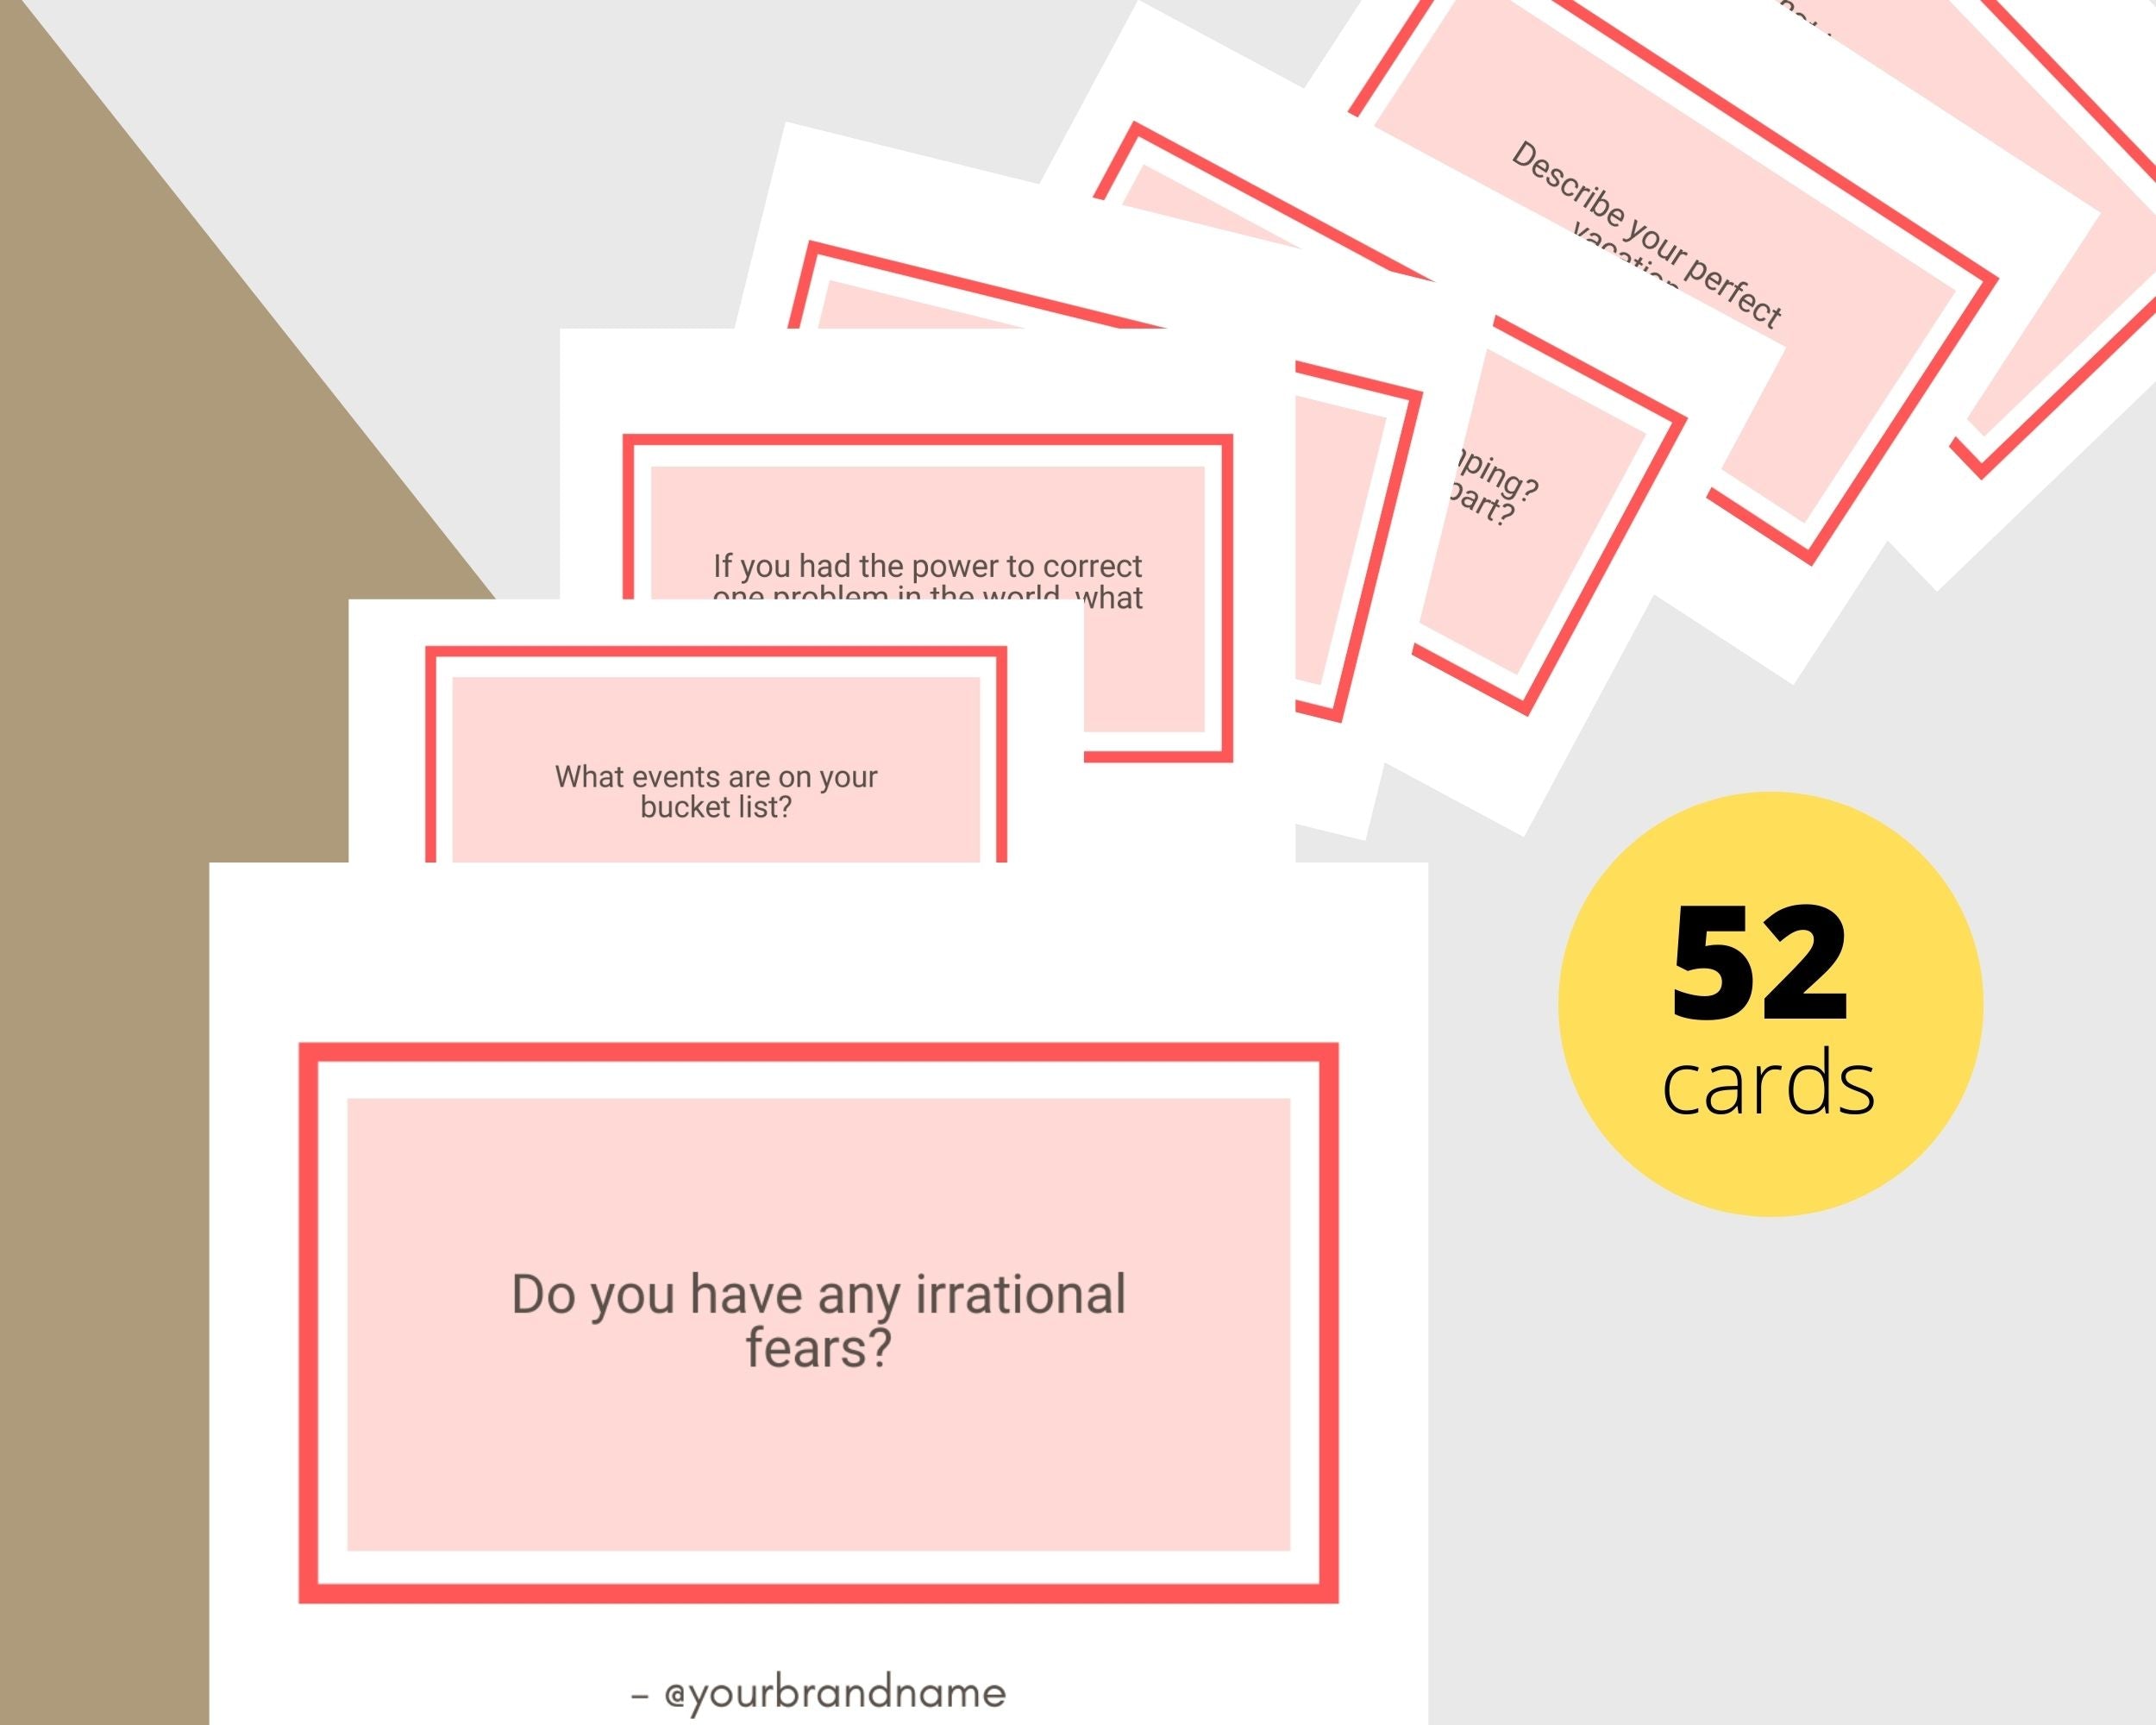 52 Questions To Know Your Love Partner Cards | Canva Inspirational Cards | Commercial Use